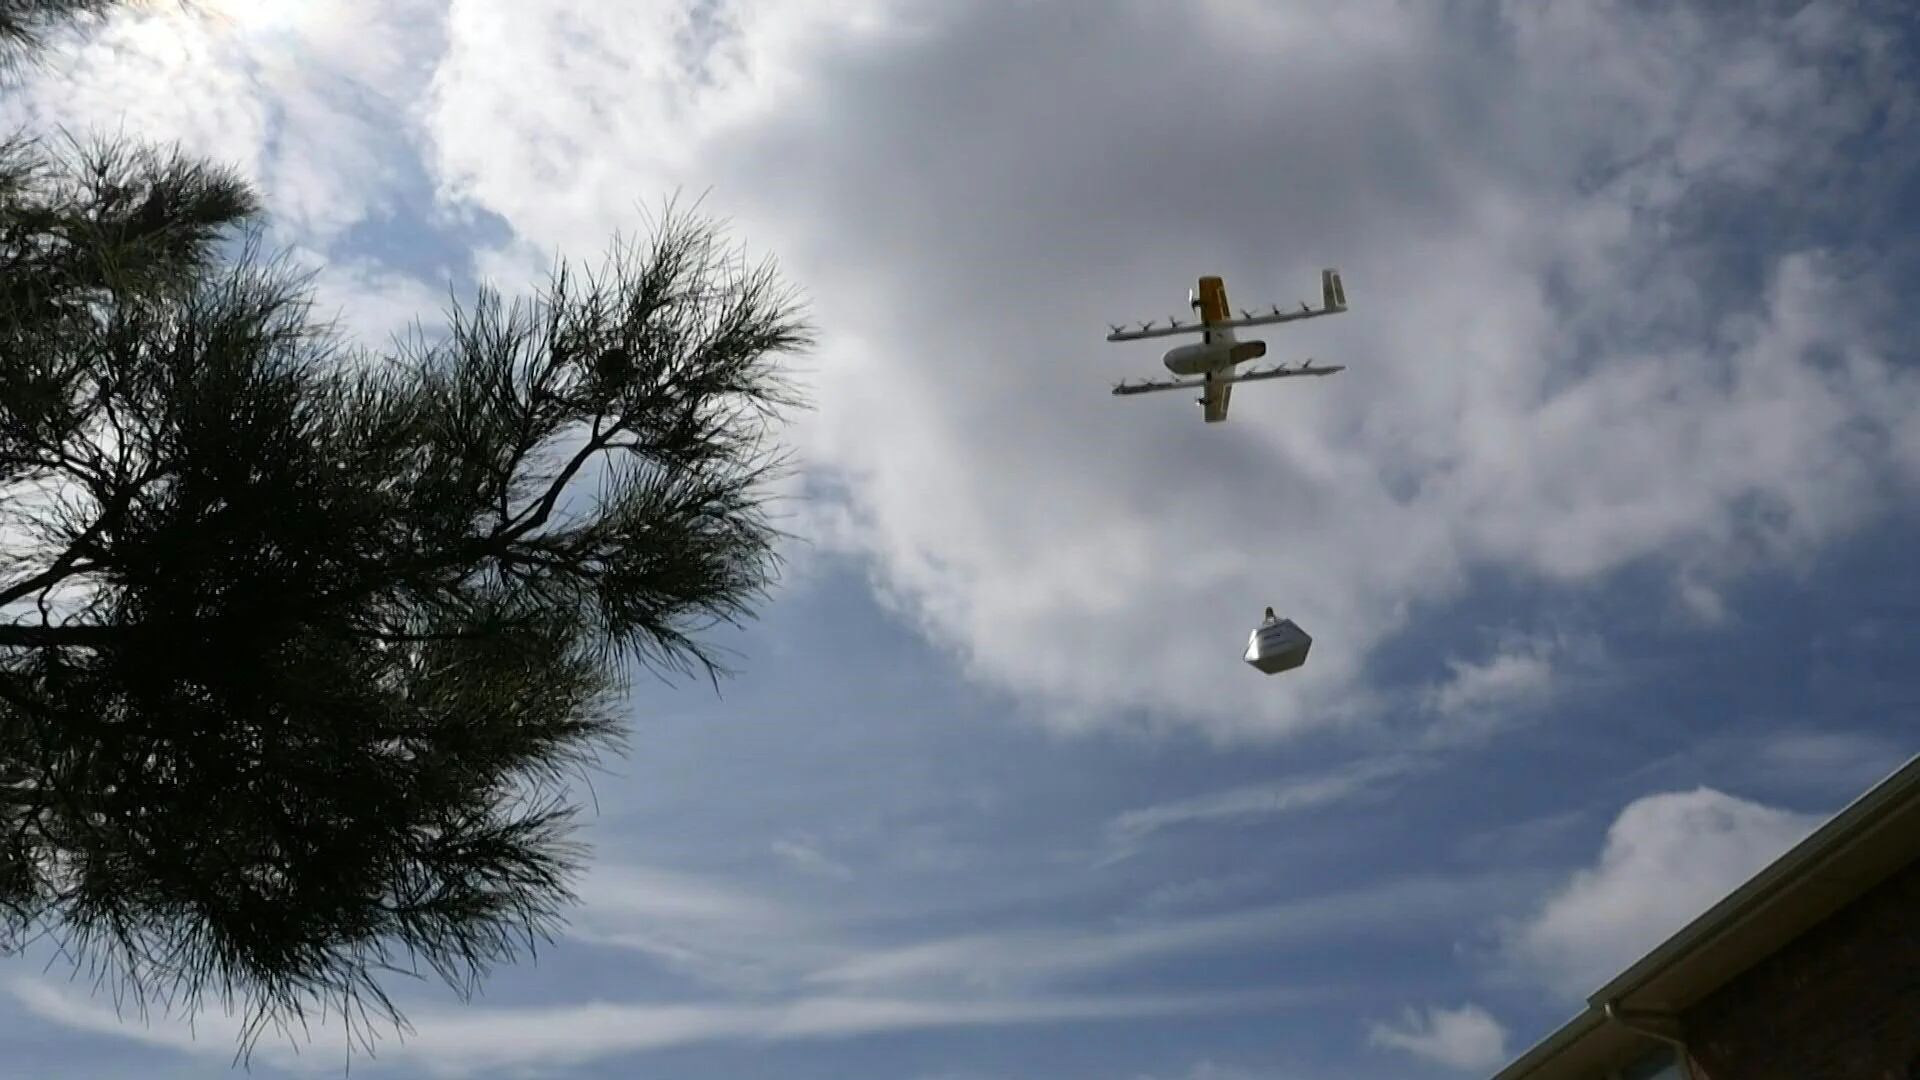 The small plane appeared in the blue sky above a house in Texas, deposited its load of snacks in the yard and sped off.  Drone deliveries are already a reality in the United States.